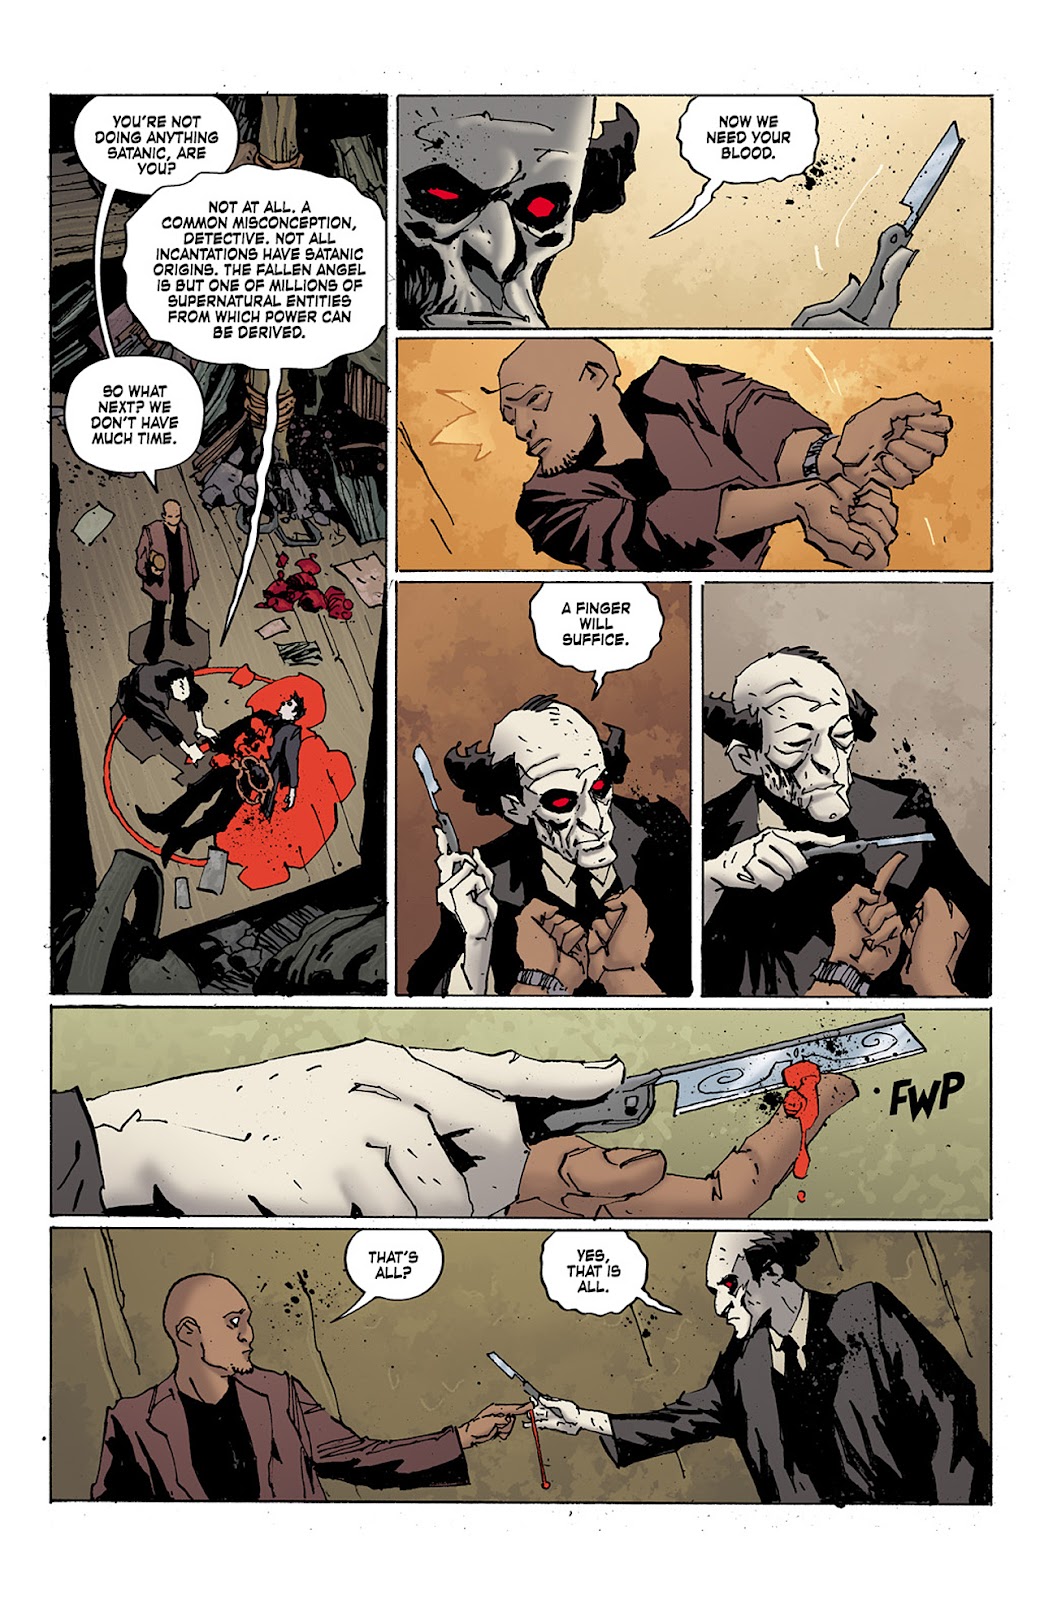 Criminal Macabre: Final Night - The 30 Days of Night Crossover issue 4 - Page 6